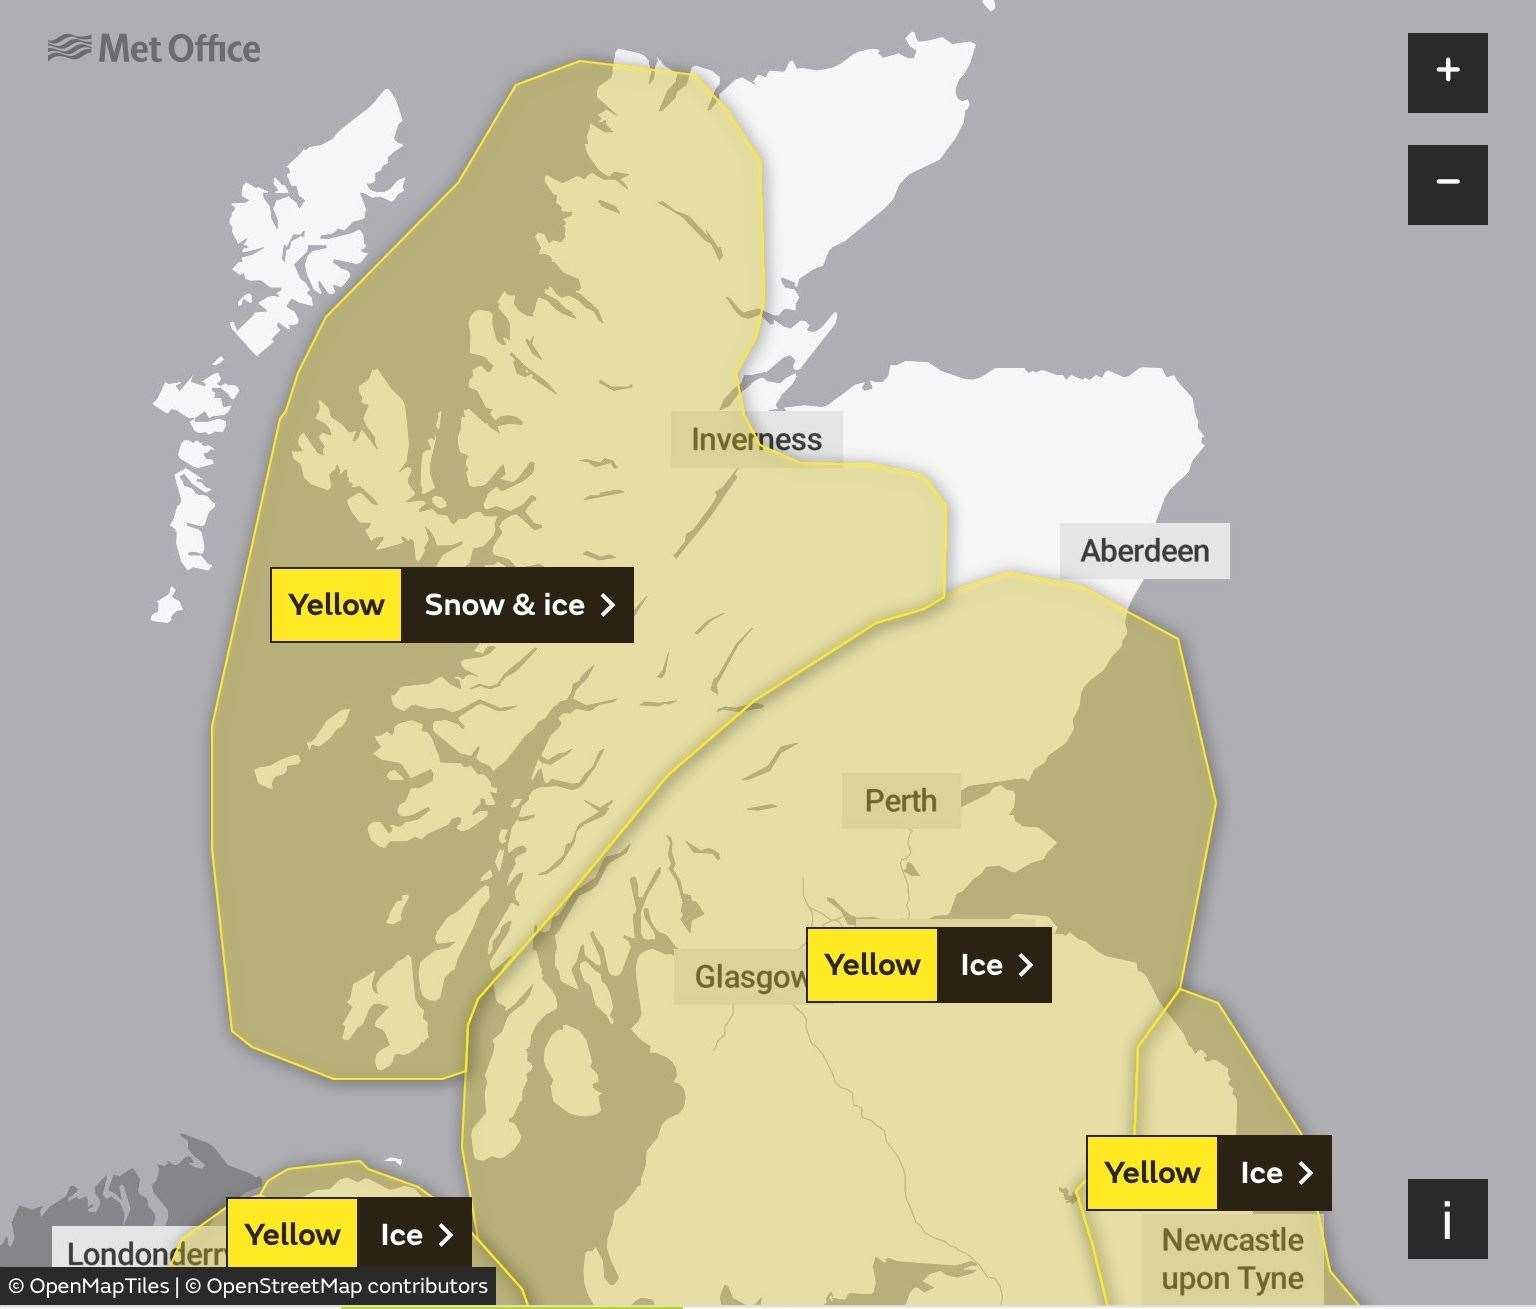 Warnings have been issued for Scotland and elsewhere.